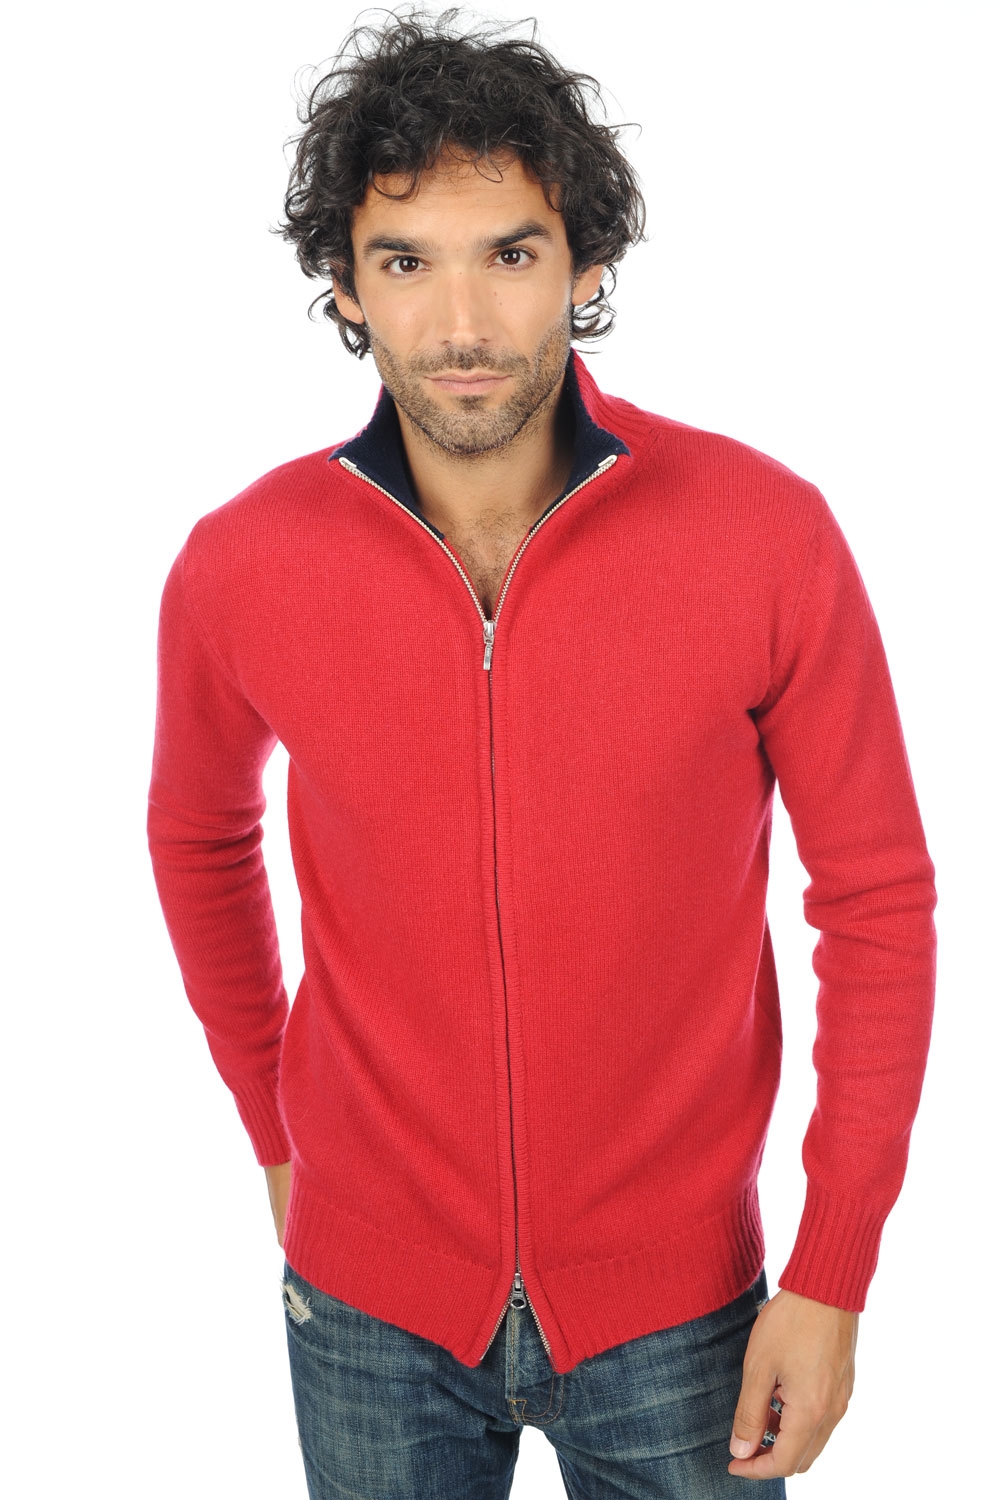 Cachemire pull homme maxime rouge velours marine fonce 4xl